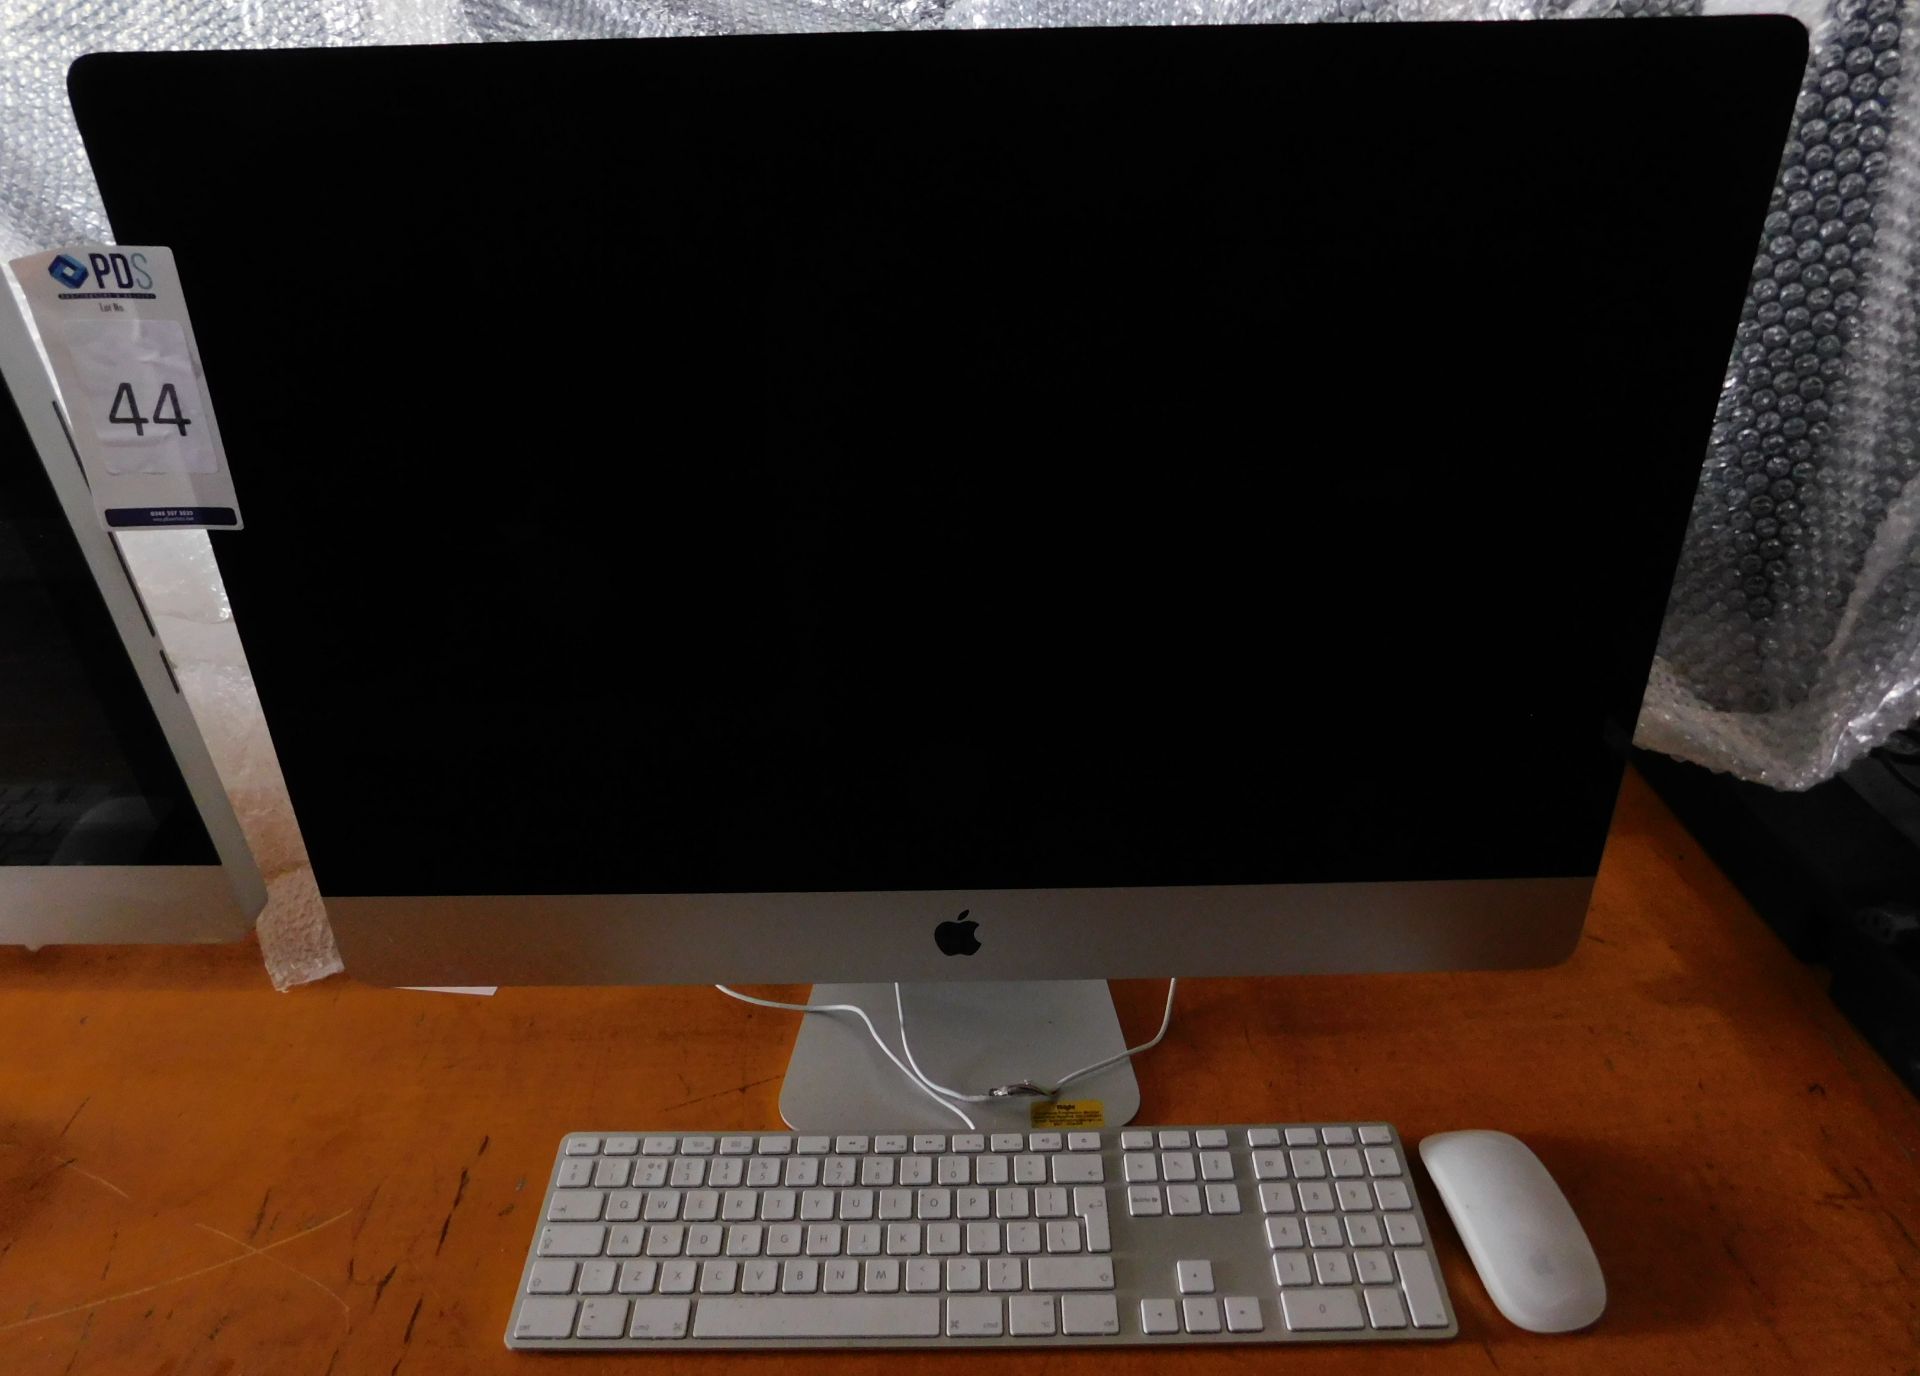 Apple iMac 27” Retina 5K 3.4GHz Core i5, with Mouse & Keyboard, Serial Number: C02W40FAJ1GG (Located